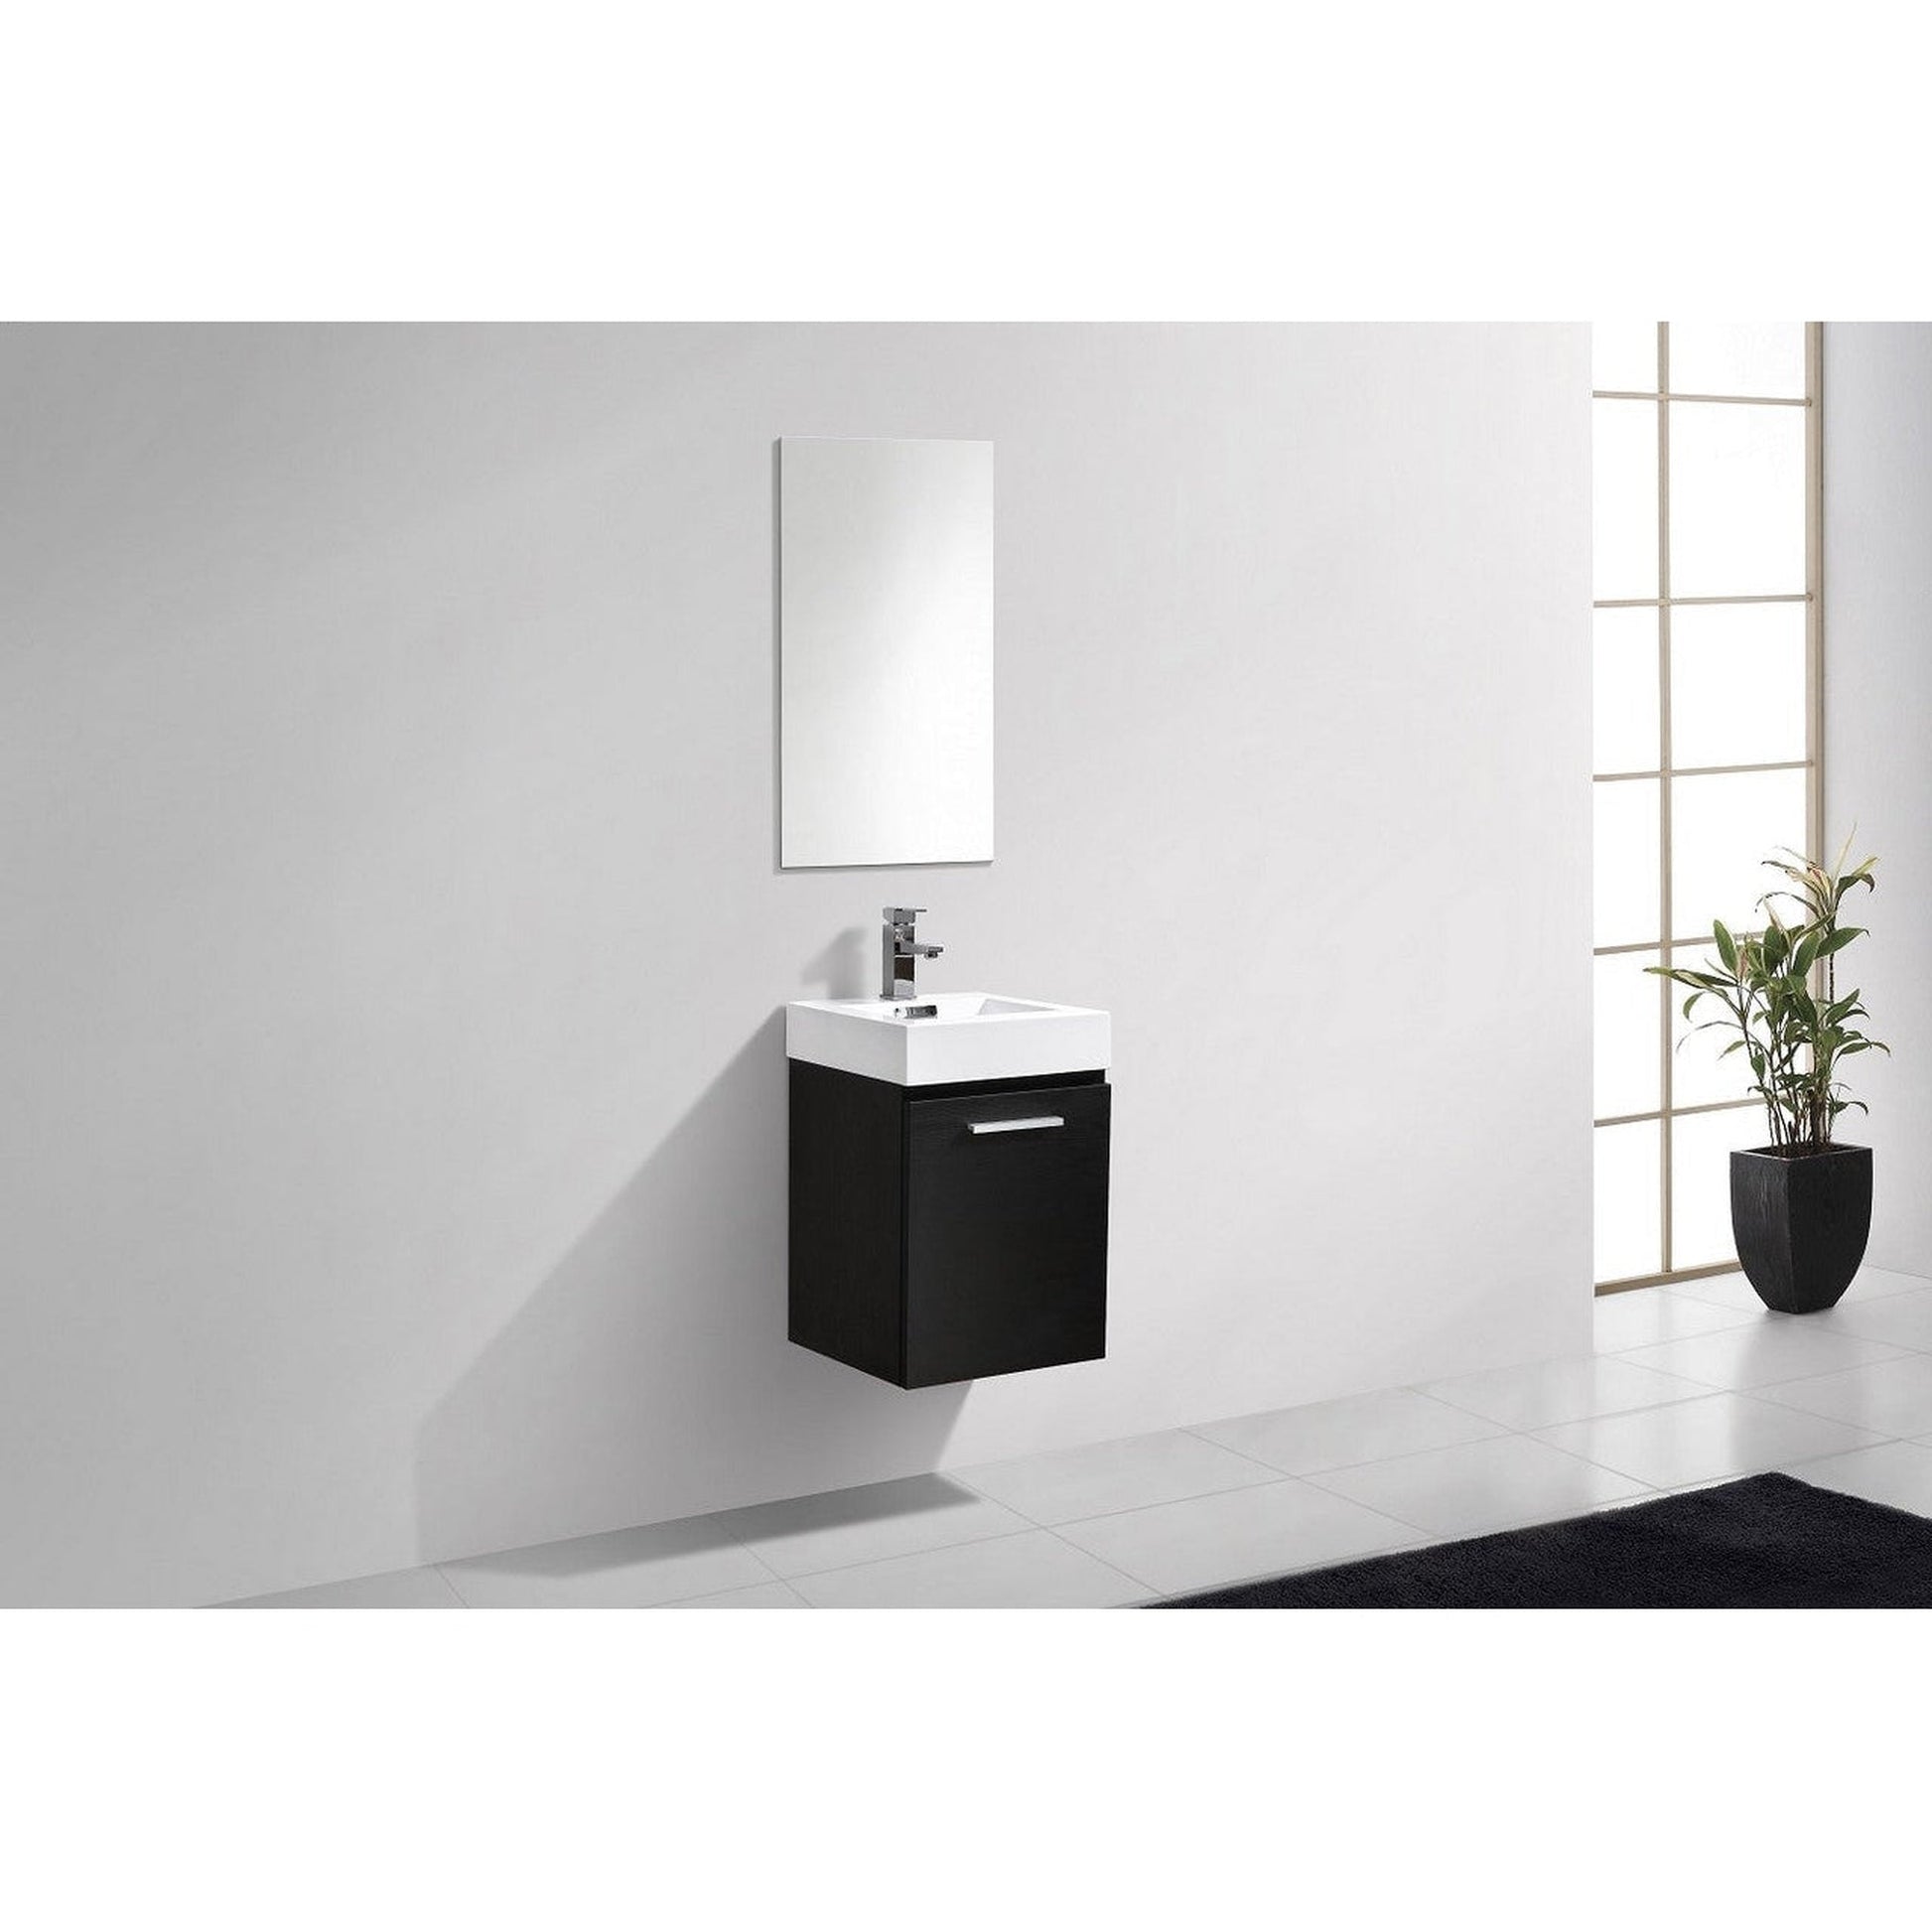 KubeBath Bliss 16" Black Wall-Mounted Modern Bathroom Vanity With Single Integrated Acrylic Sink With Overflow and 22" Black Framed Mirror With Shelf